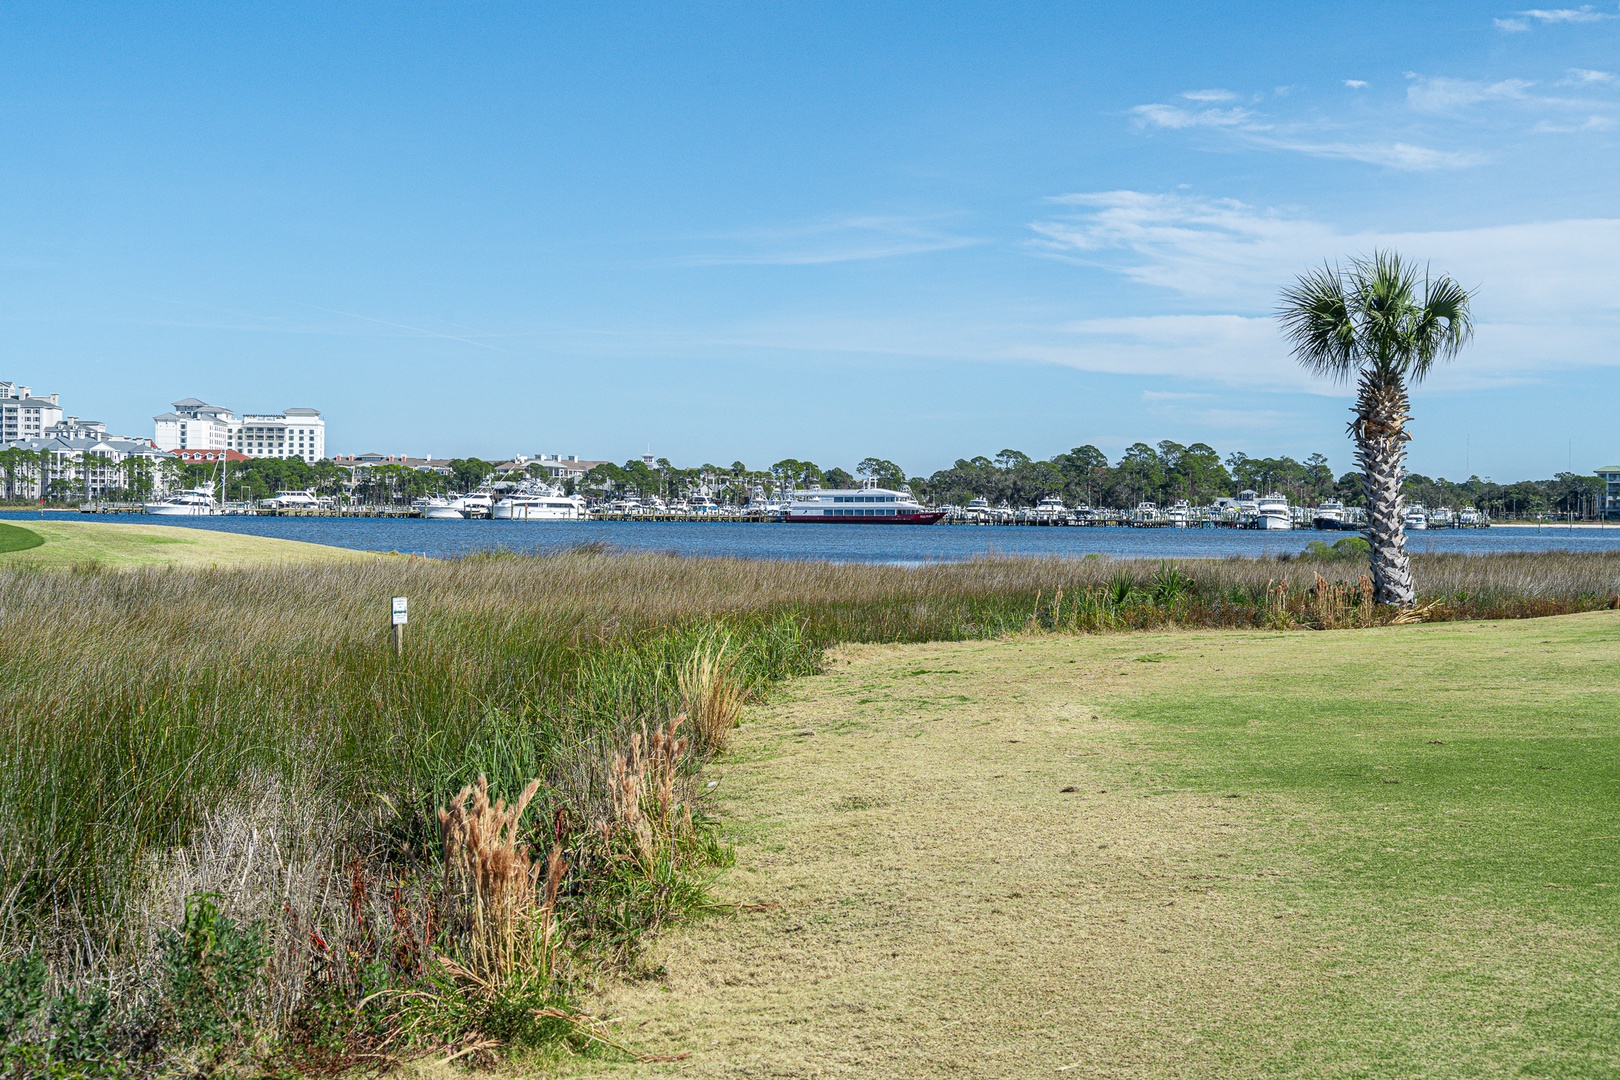 Spend your days golfing by the marina – stunning views await!